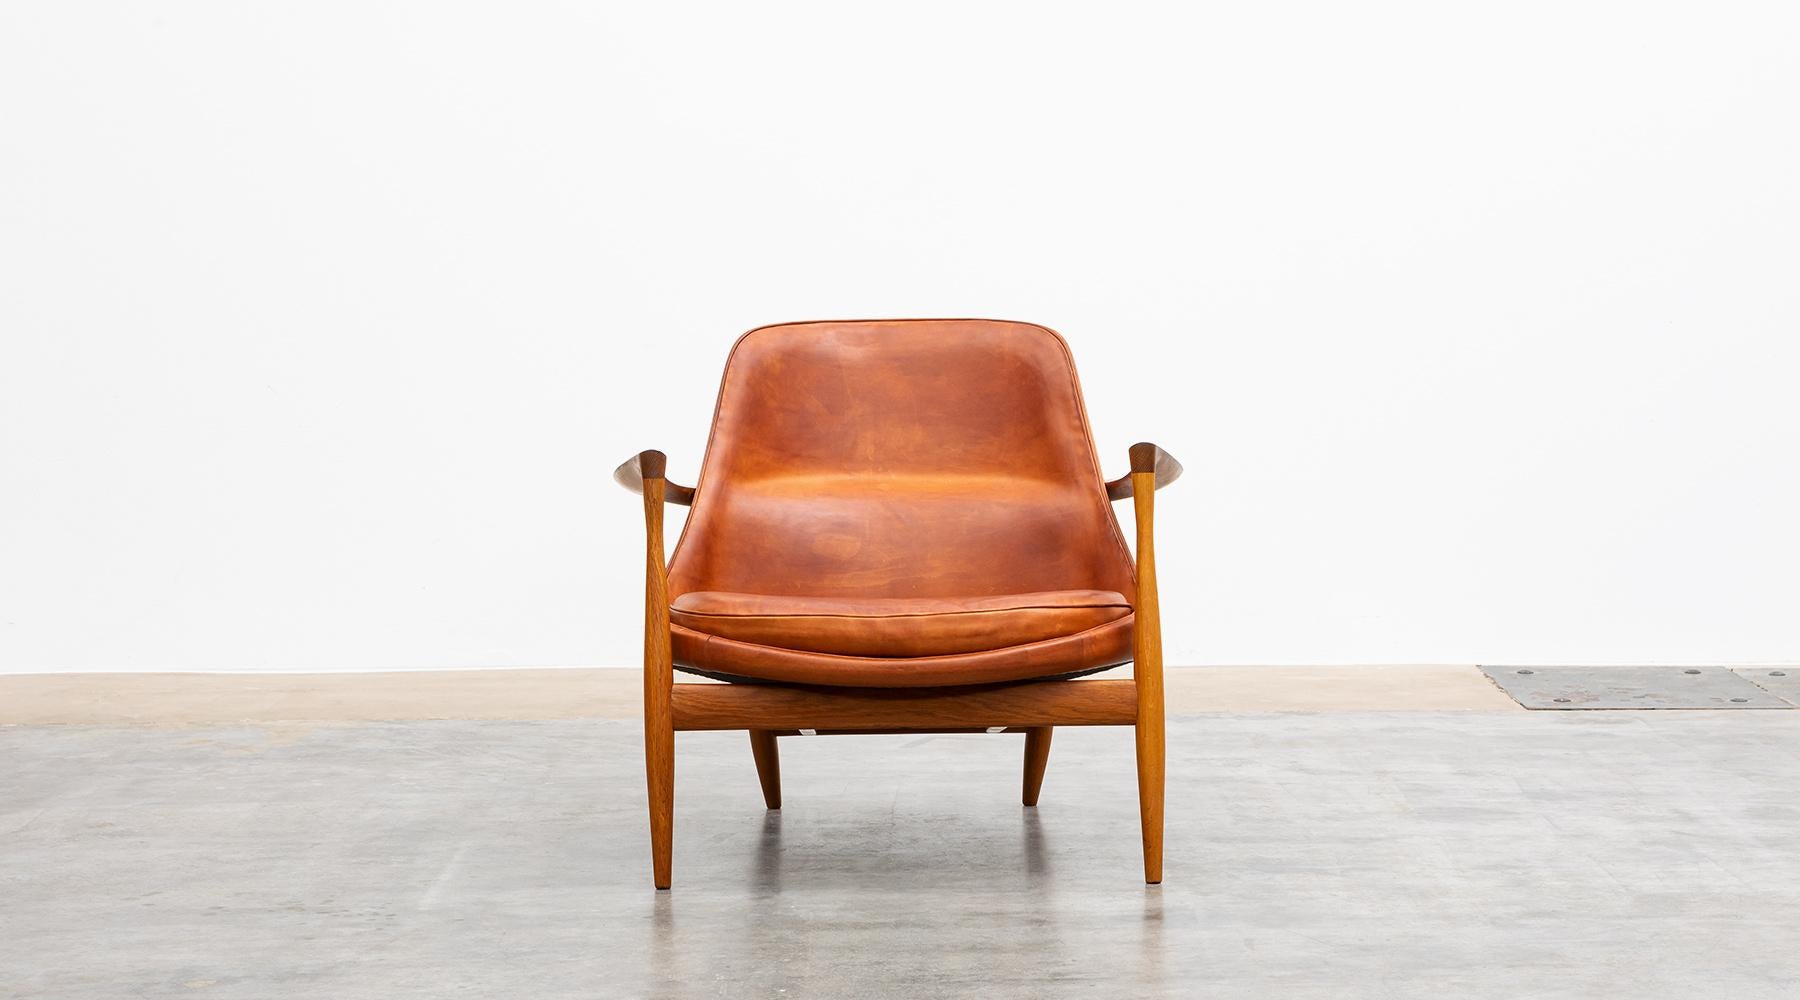 Matching lounge chair with ottoman, oak, leather, Denmark, 1956.

Wonderful example of Ib Kofod-Larsen lounge chair with ottoman in oak with amazing patinated cognac leather. The lounge chair and stool were created in 1956 and are in perfect